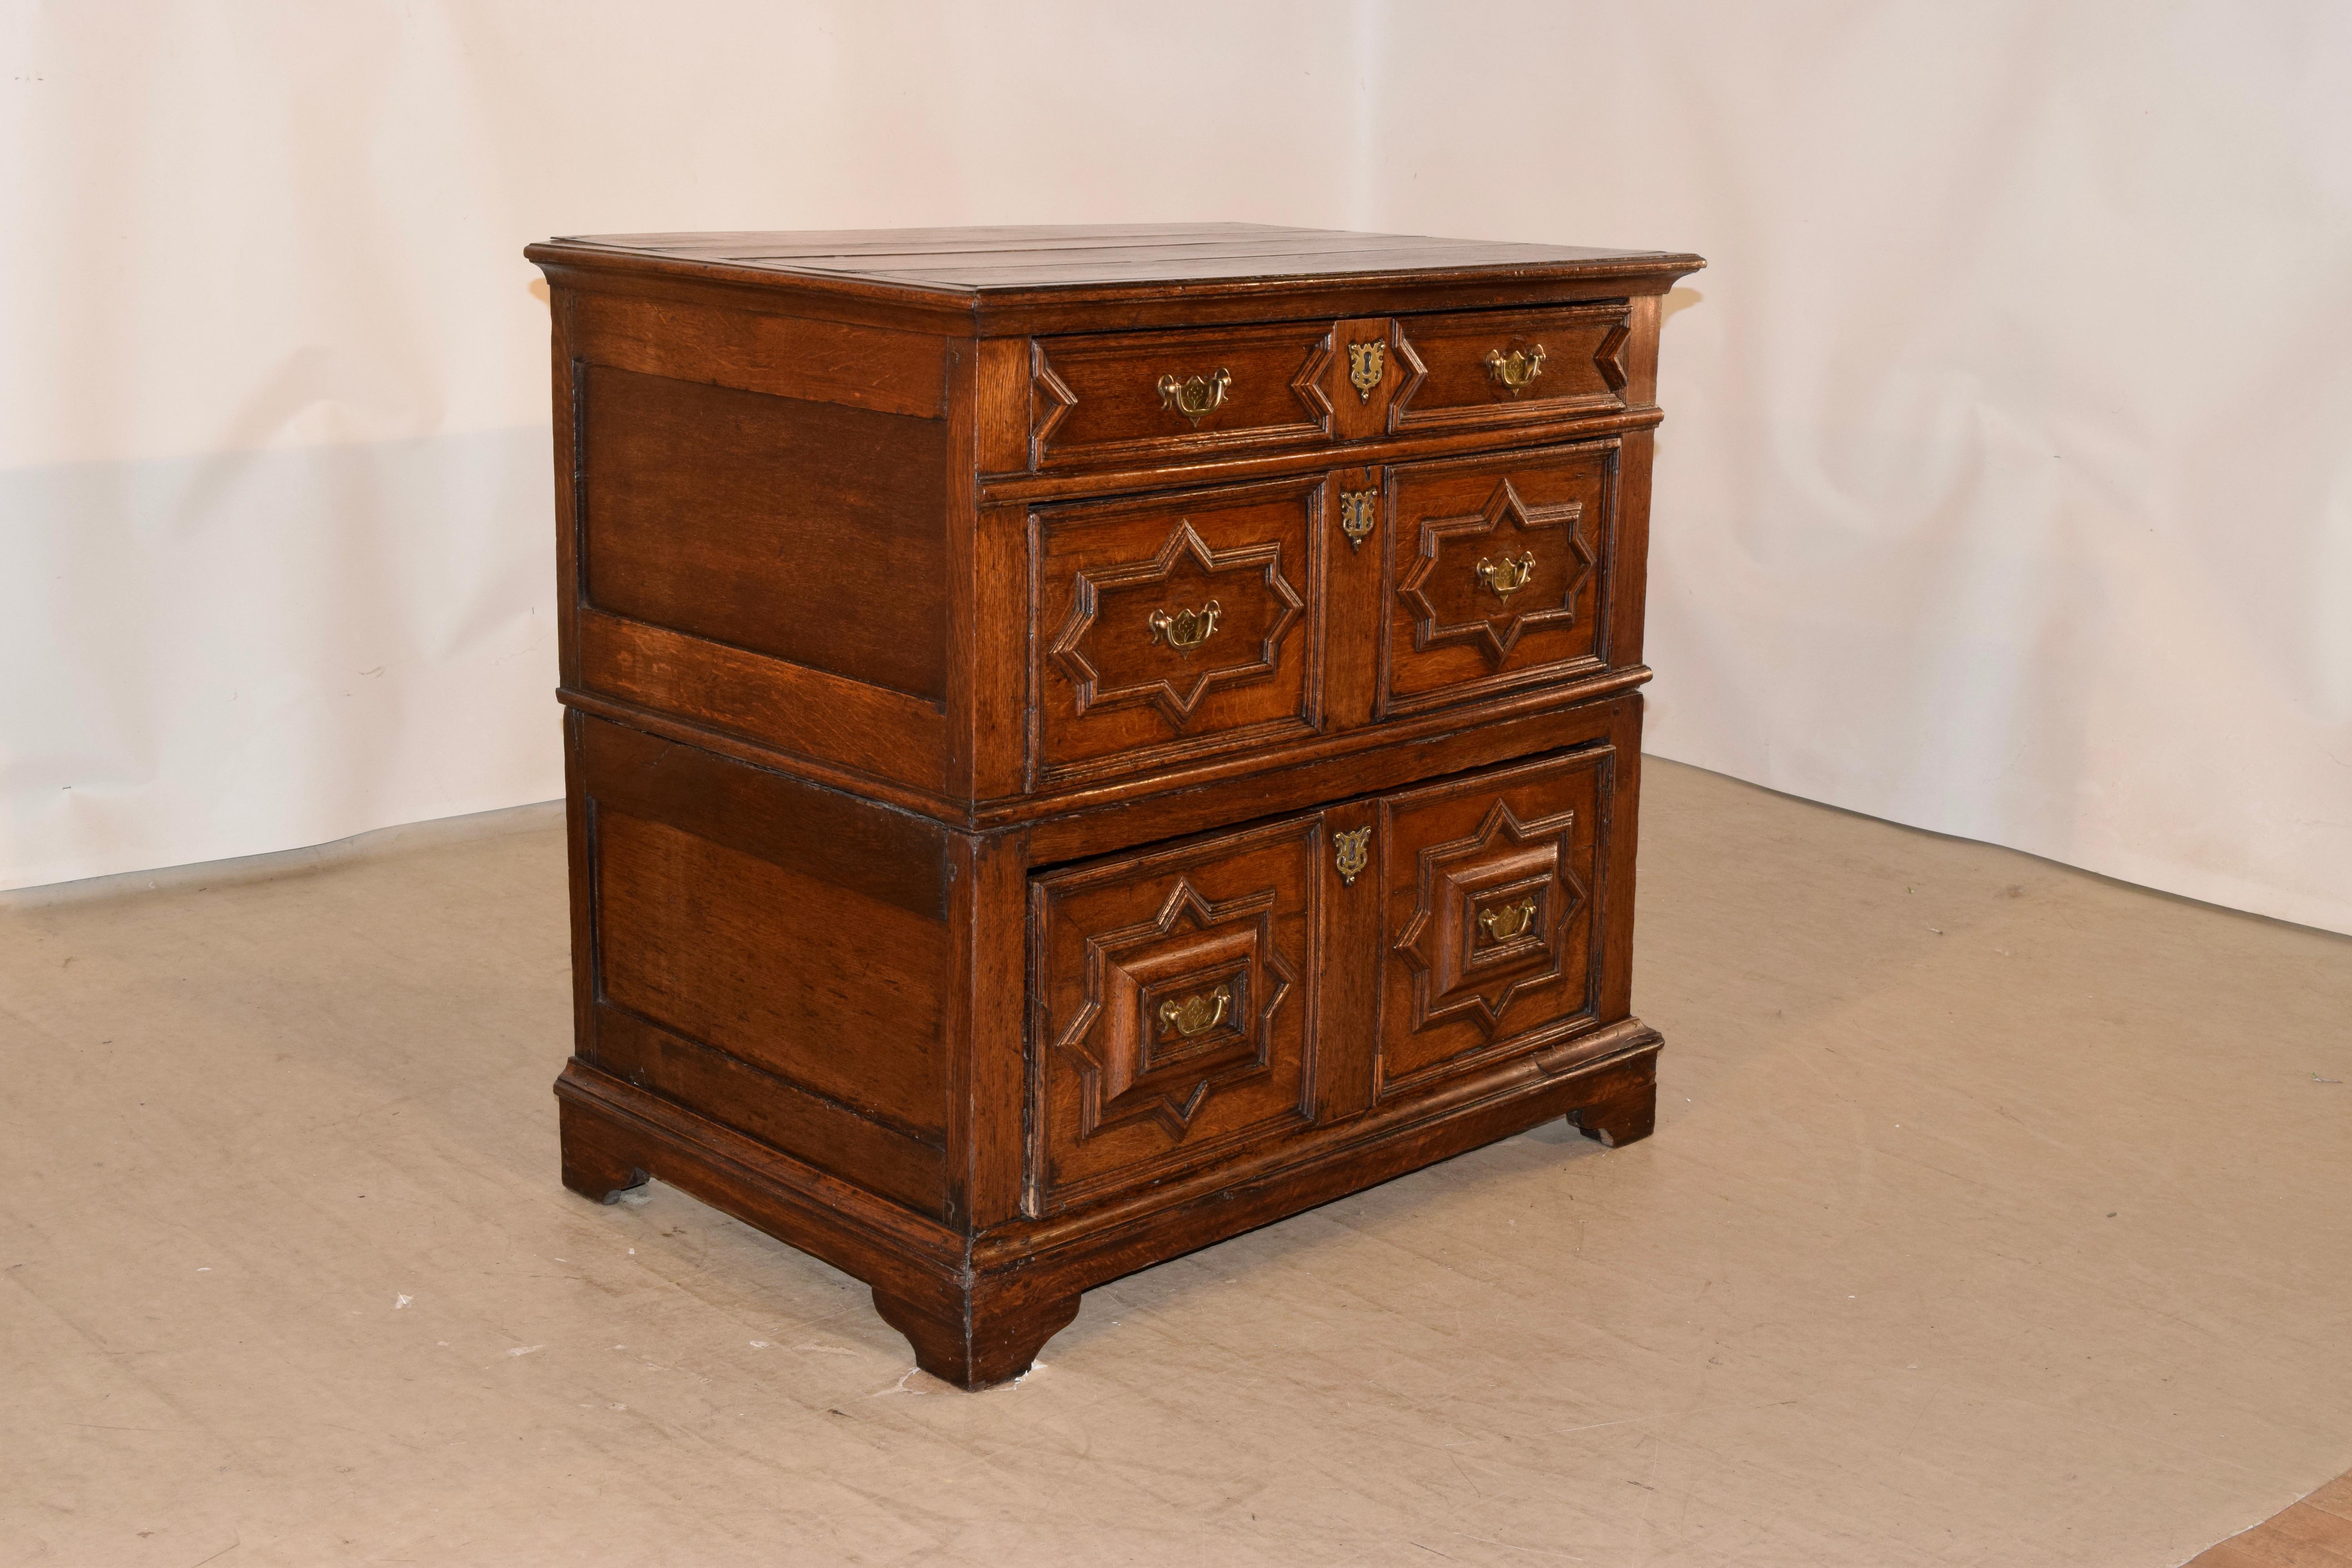 17th century rare English oak two piece chest. The top is made from four planks and is banded with a beveled edge. The sides are paneled and there are graduated drawers with geometric moldings on the drawer fronts, in differing patterns for added